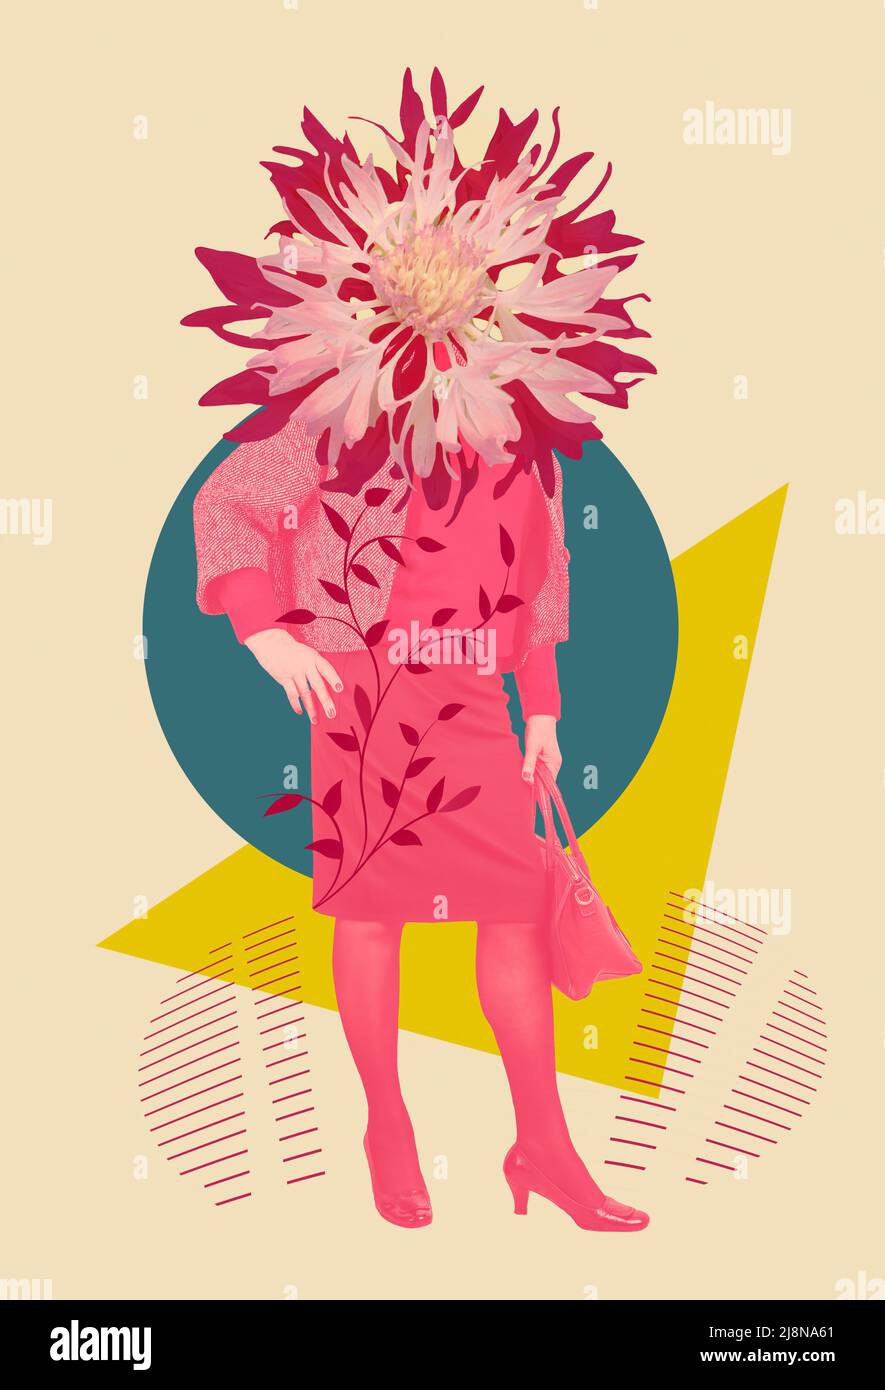 Abstract contemporary art designe with buisness woman with flower head standing on color background. Stock Photo